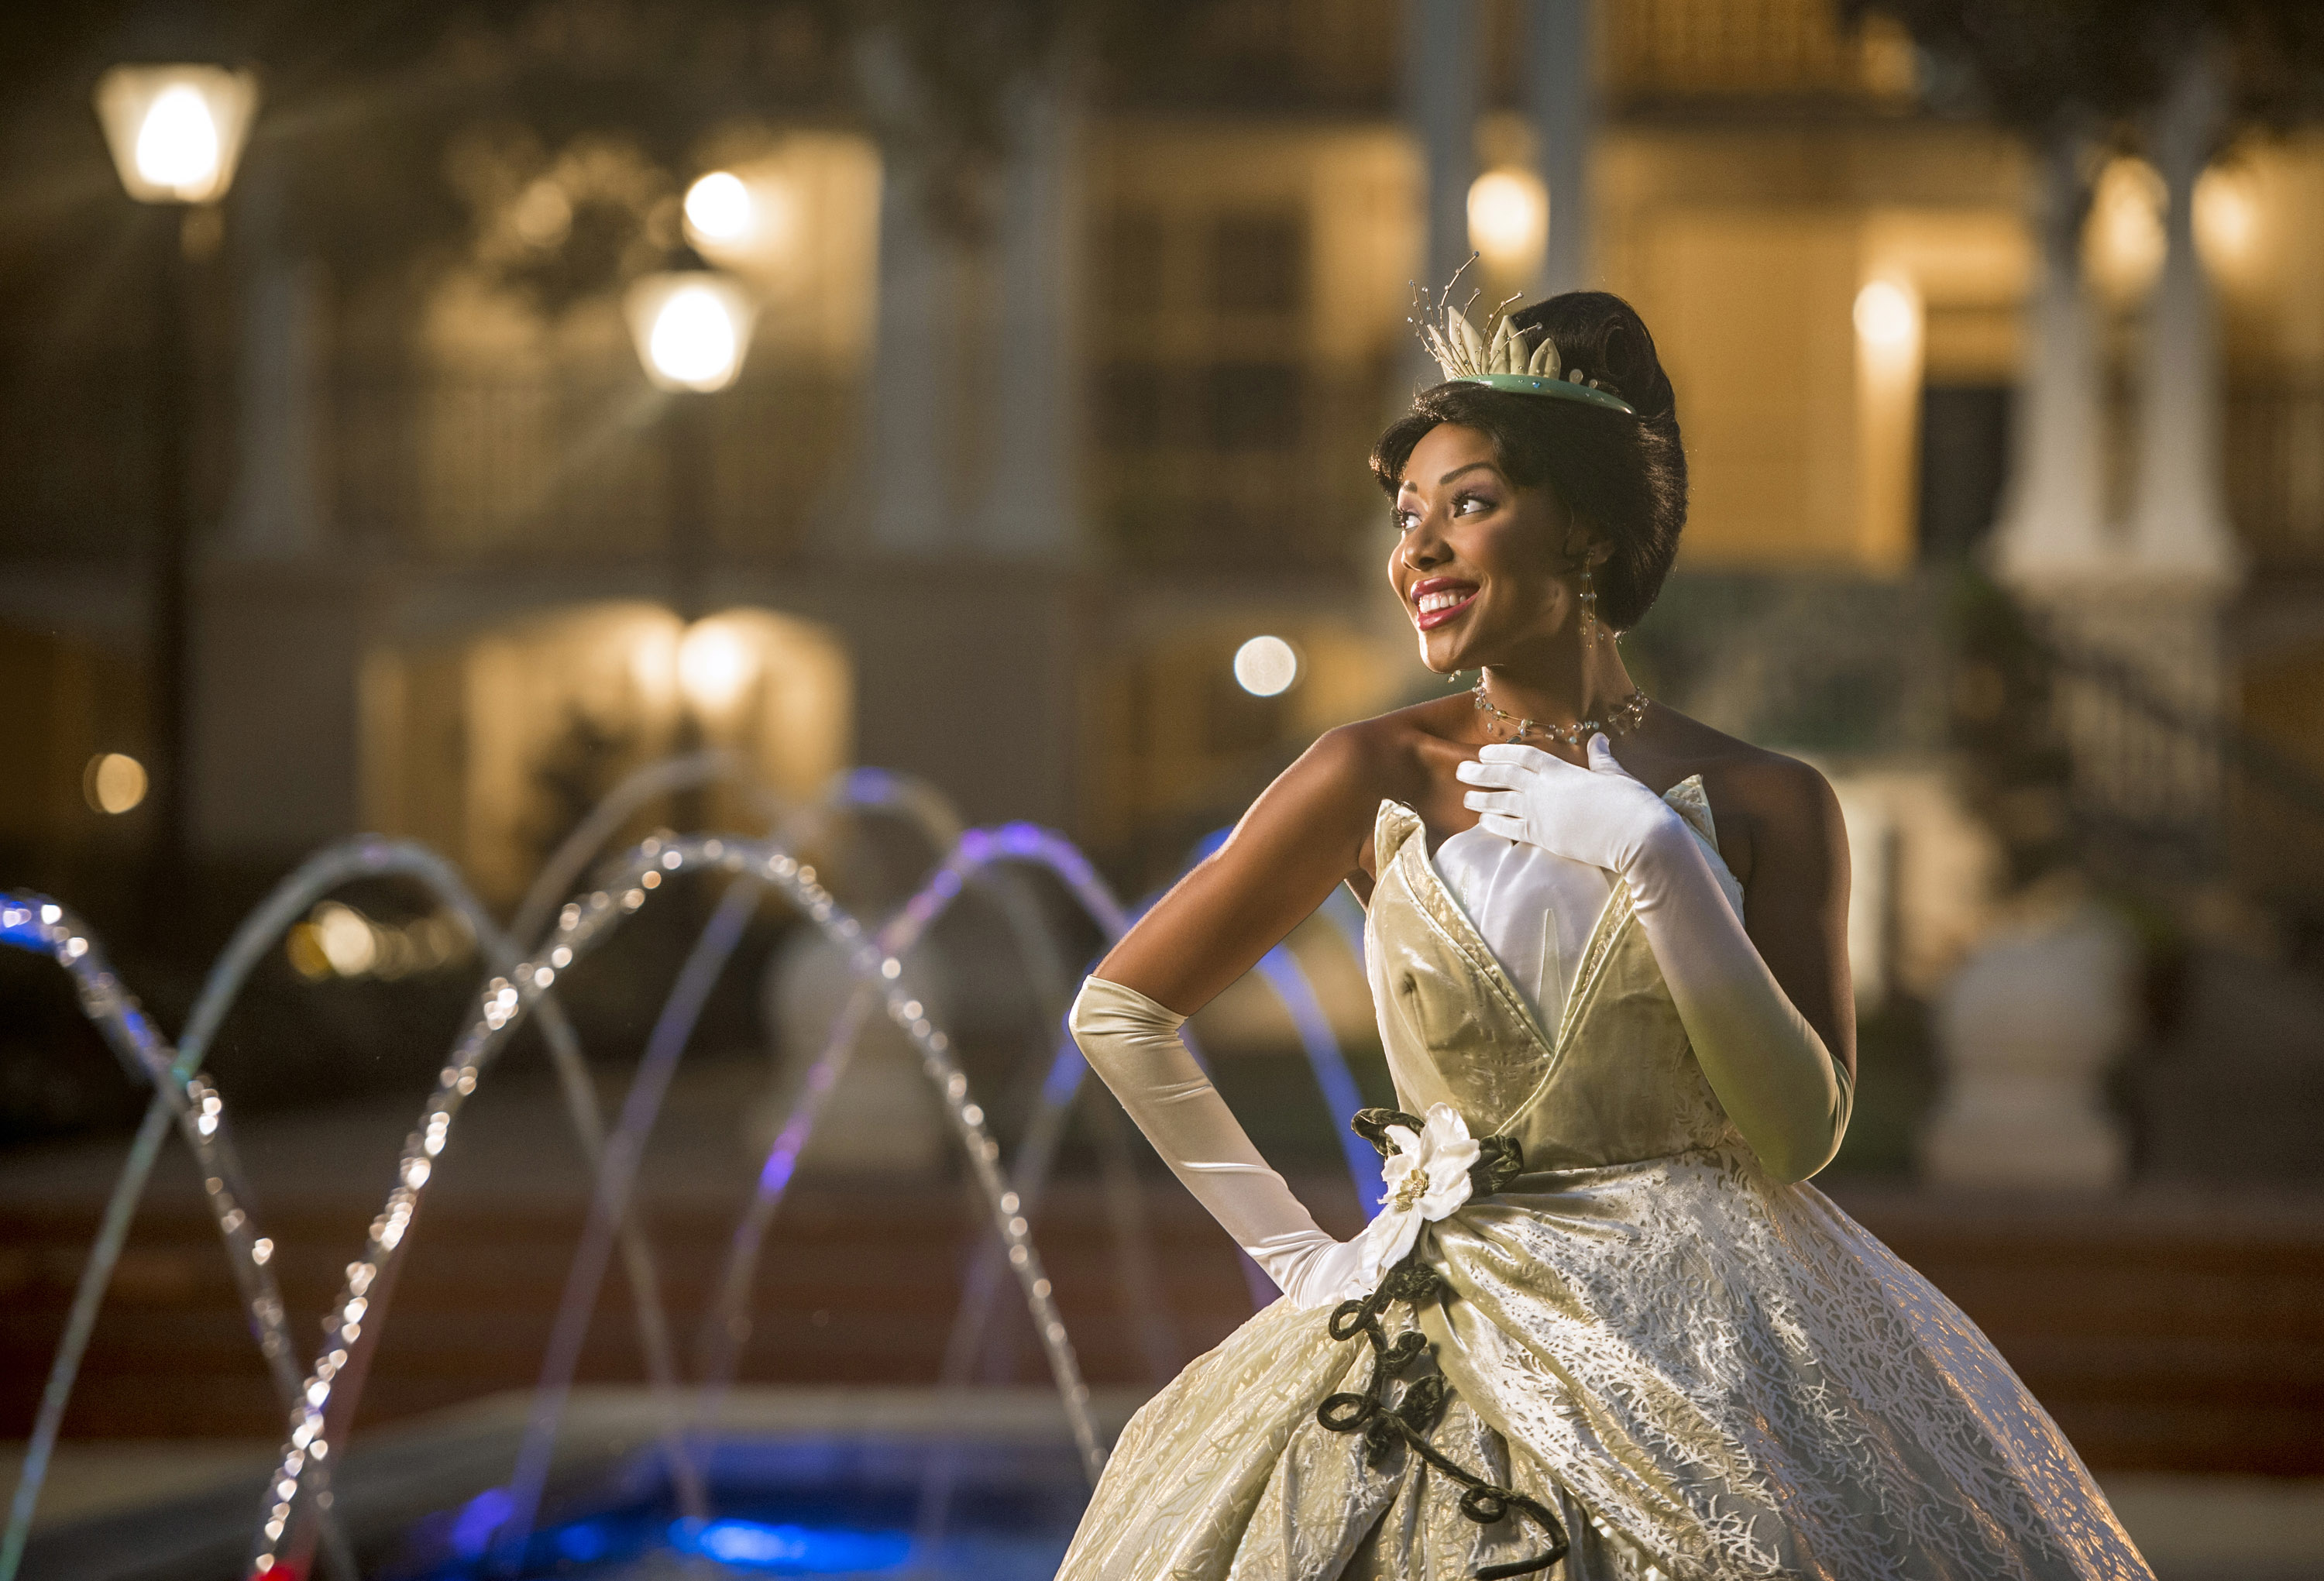 New Princess and the Frog Restaurant Coming To Walt Disney World